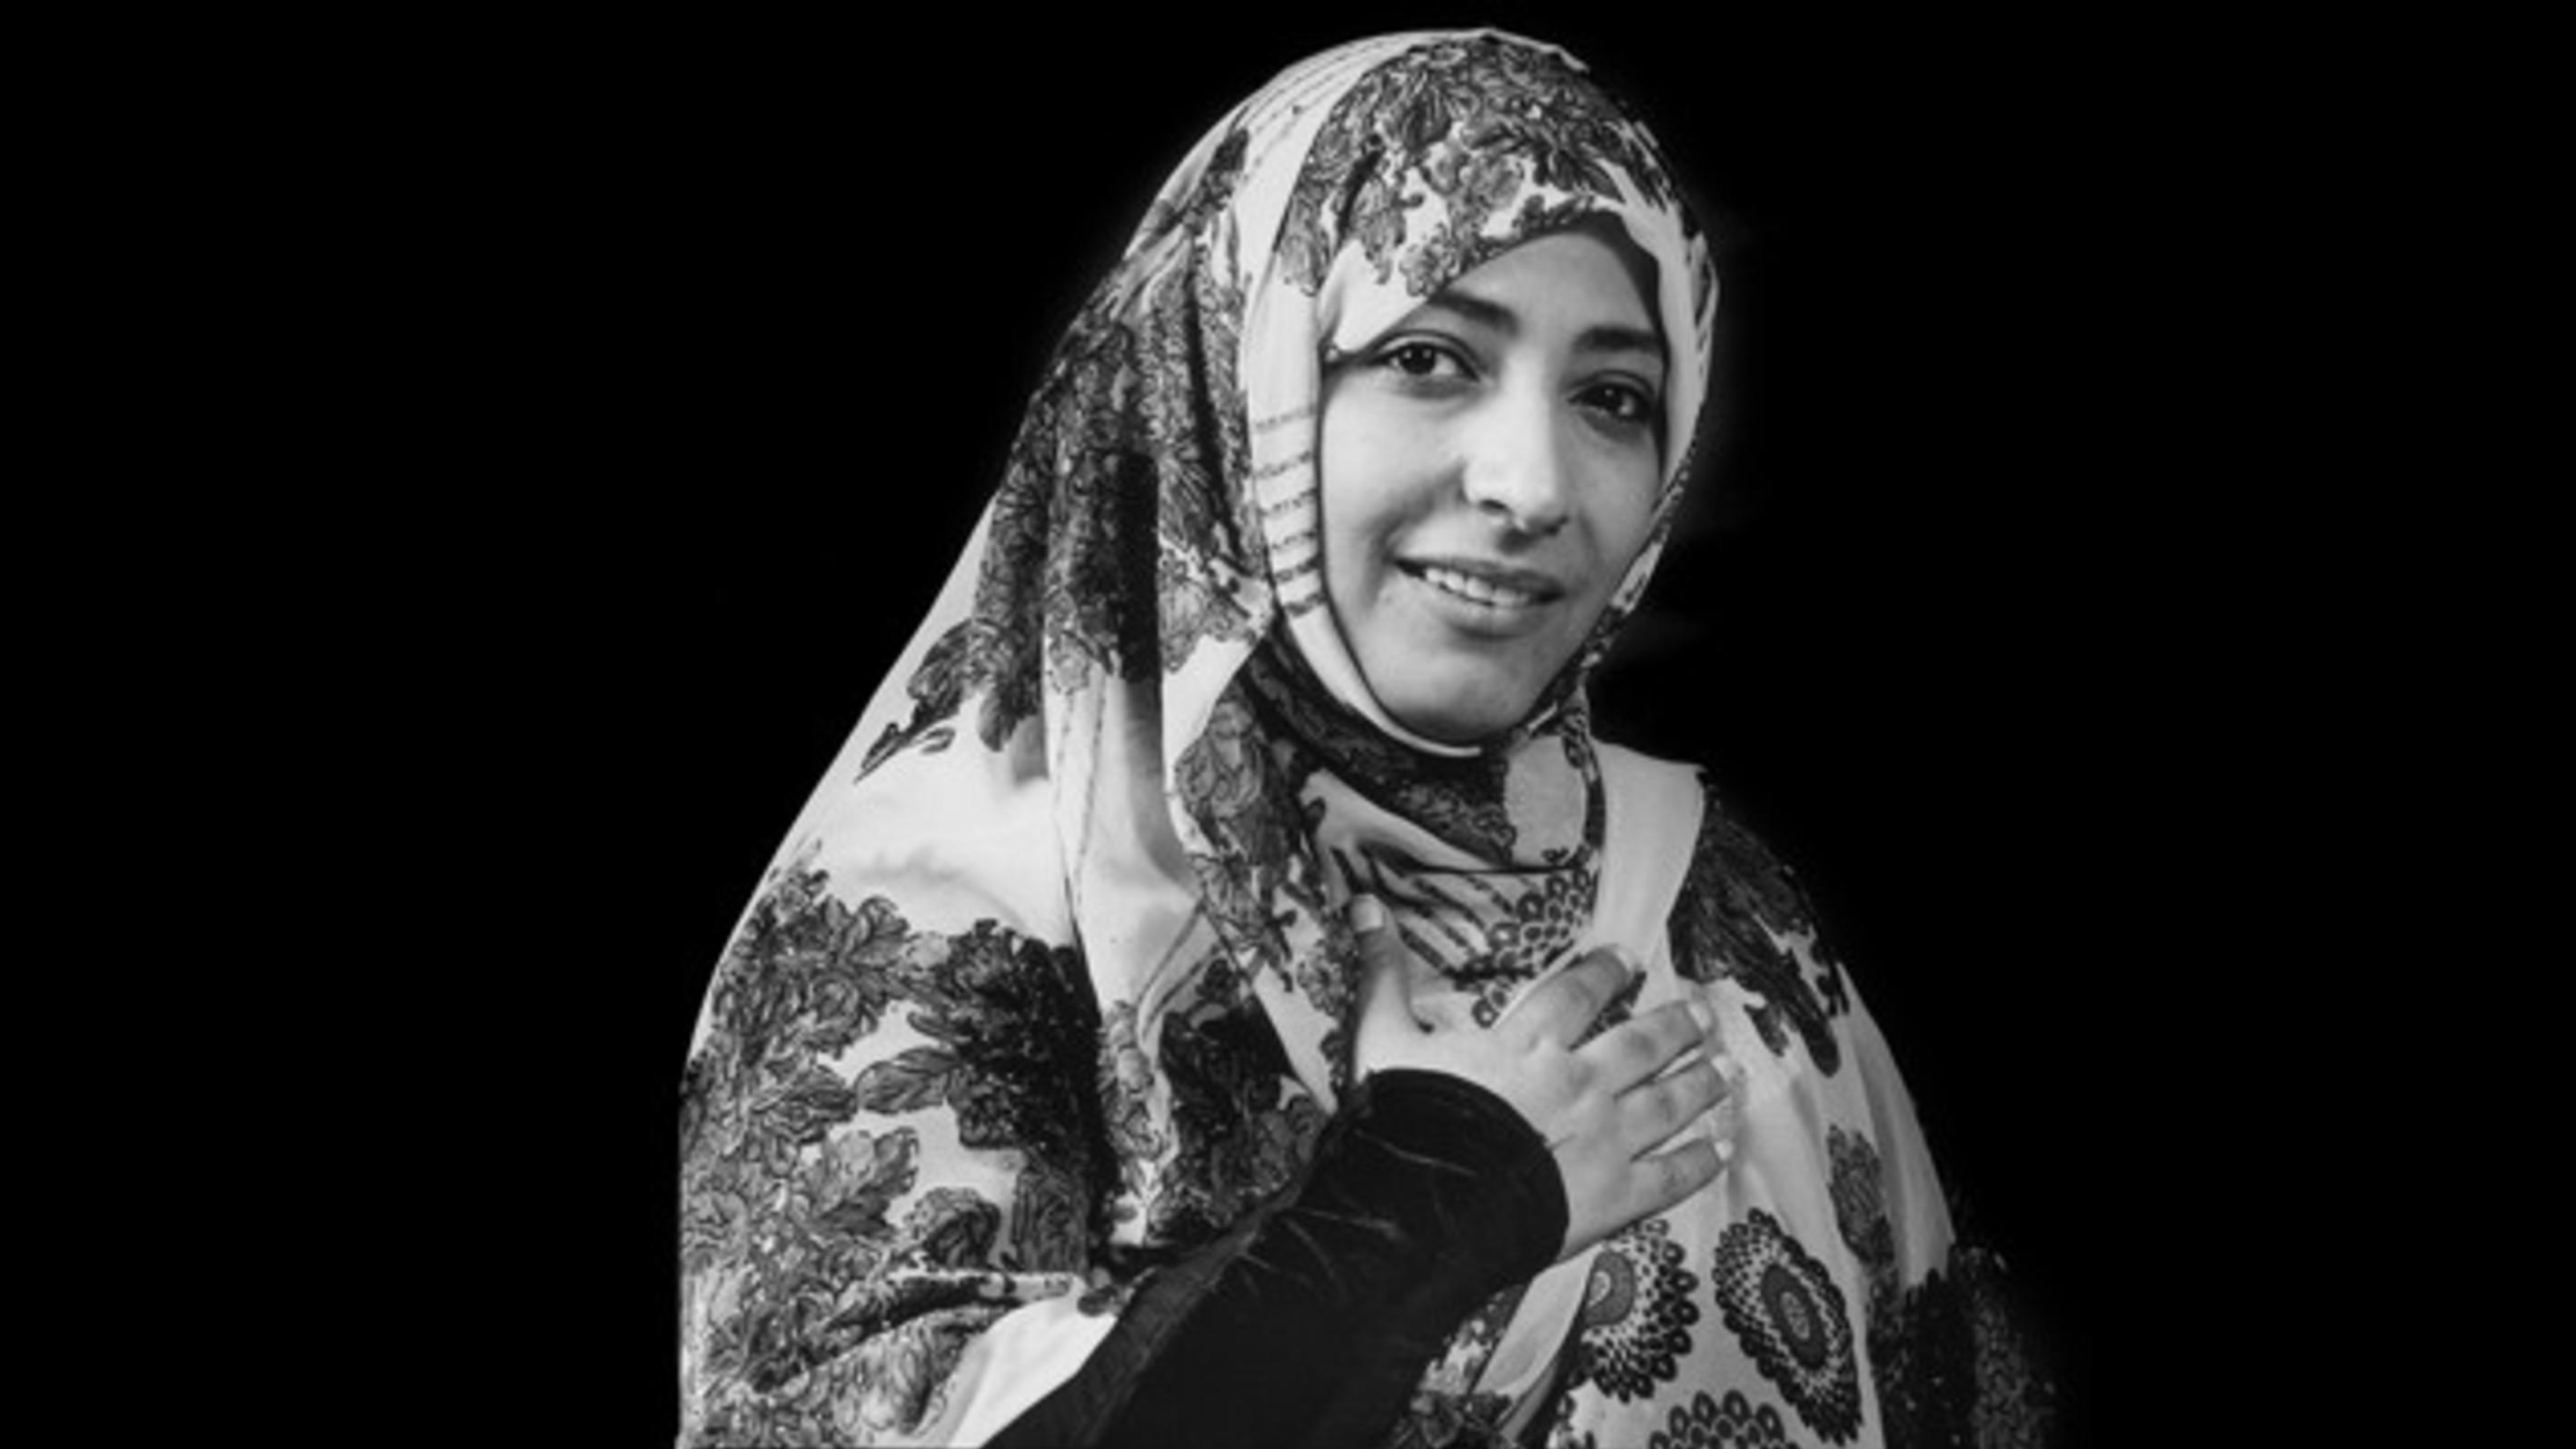 Tawakkol Karman: “Non-violence is the common denominator of all my actions”